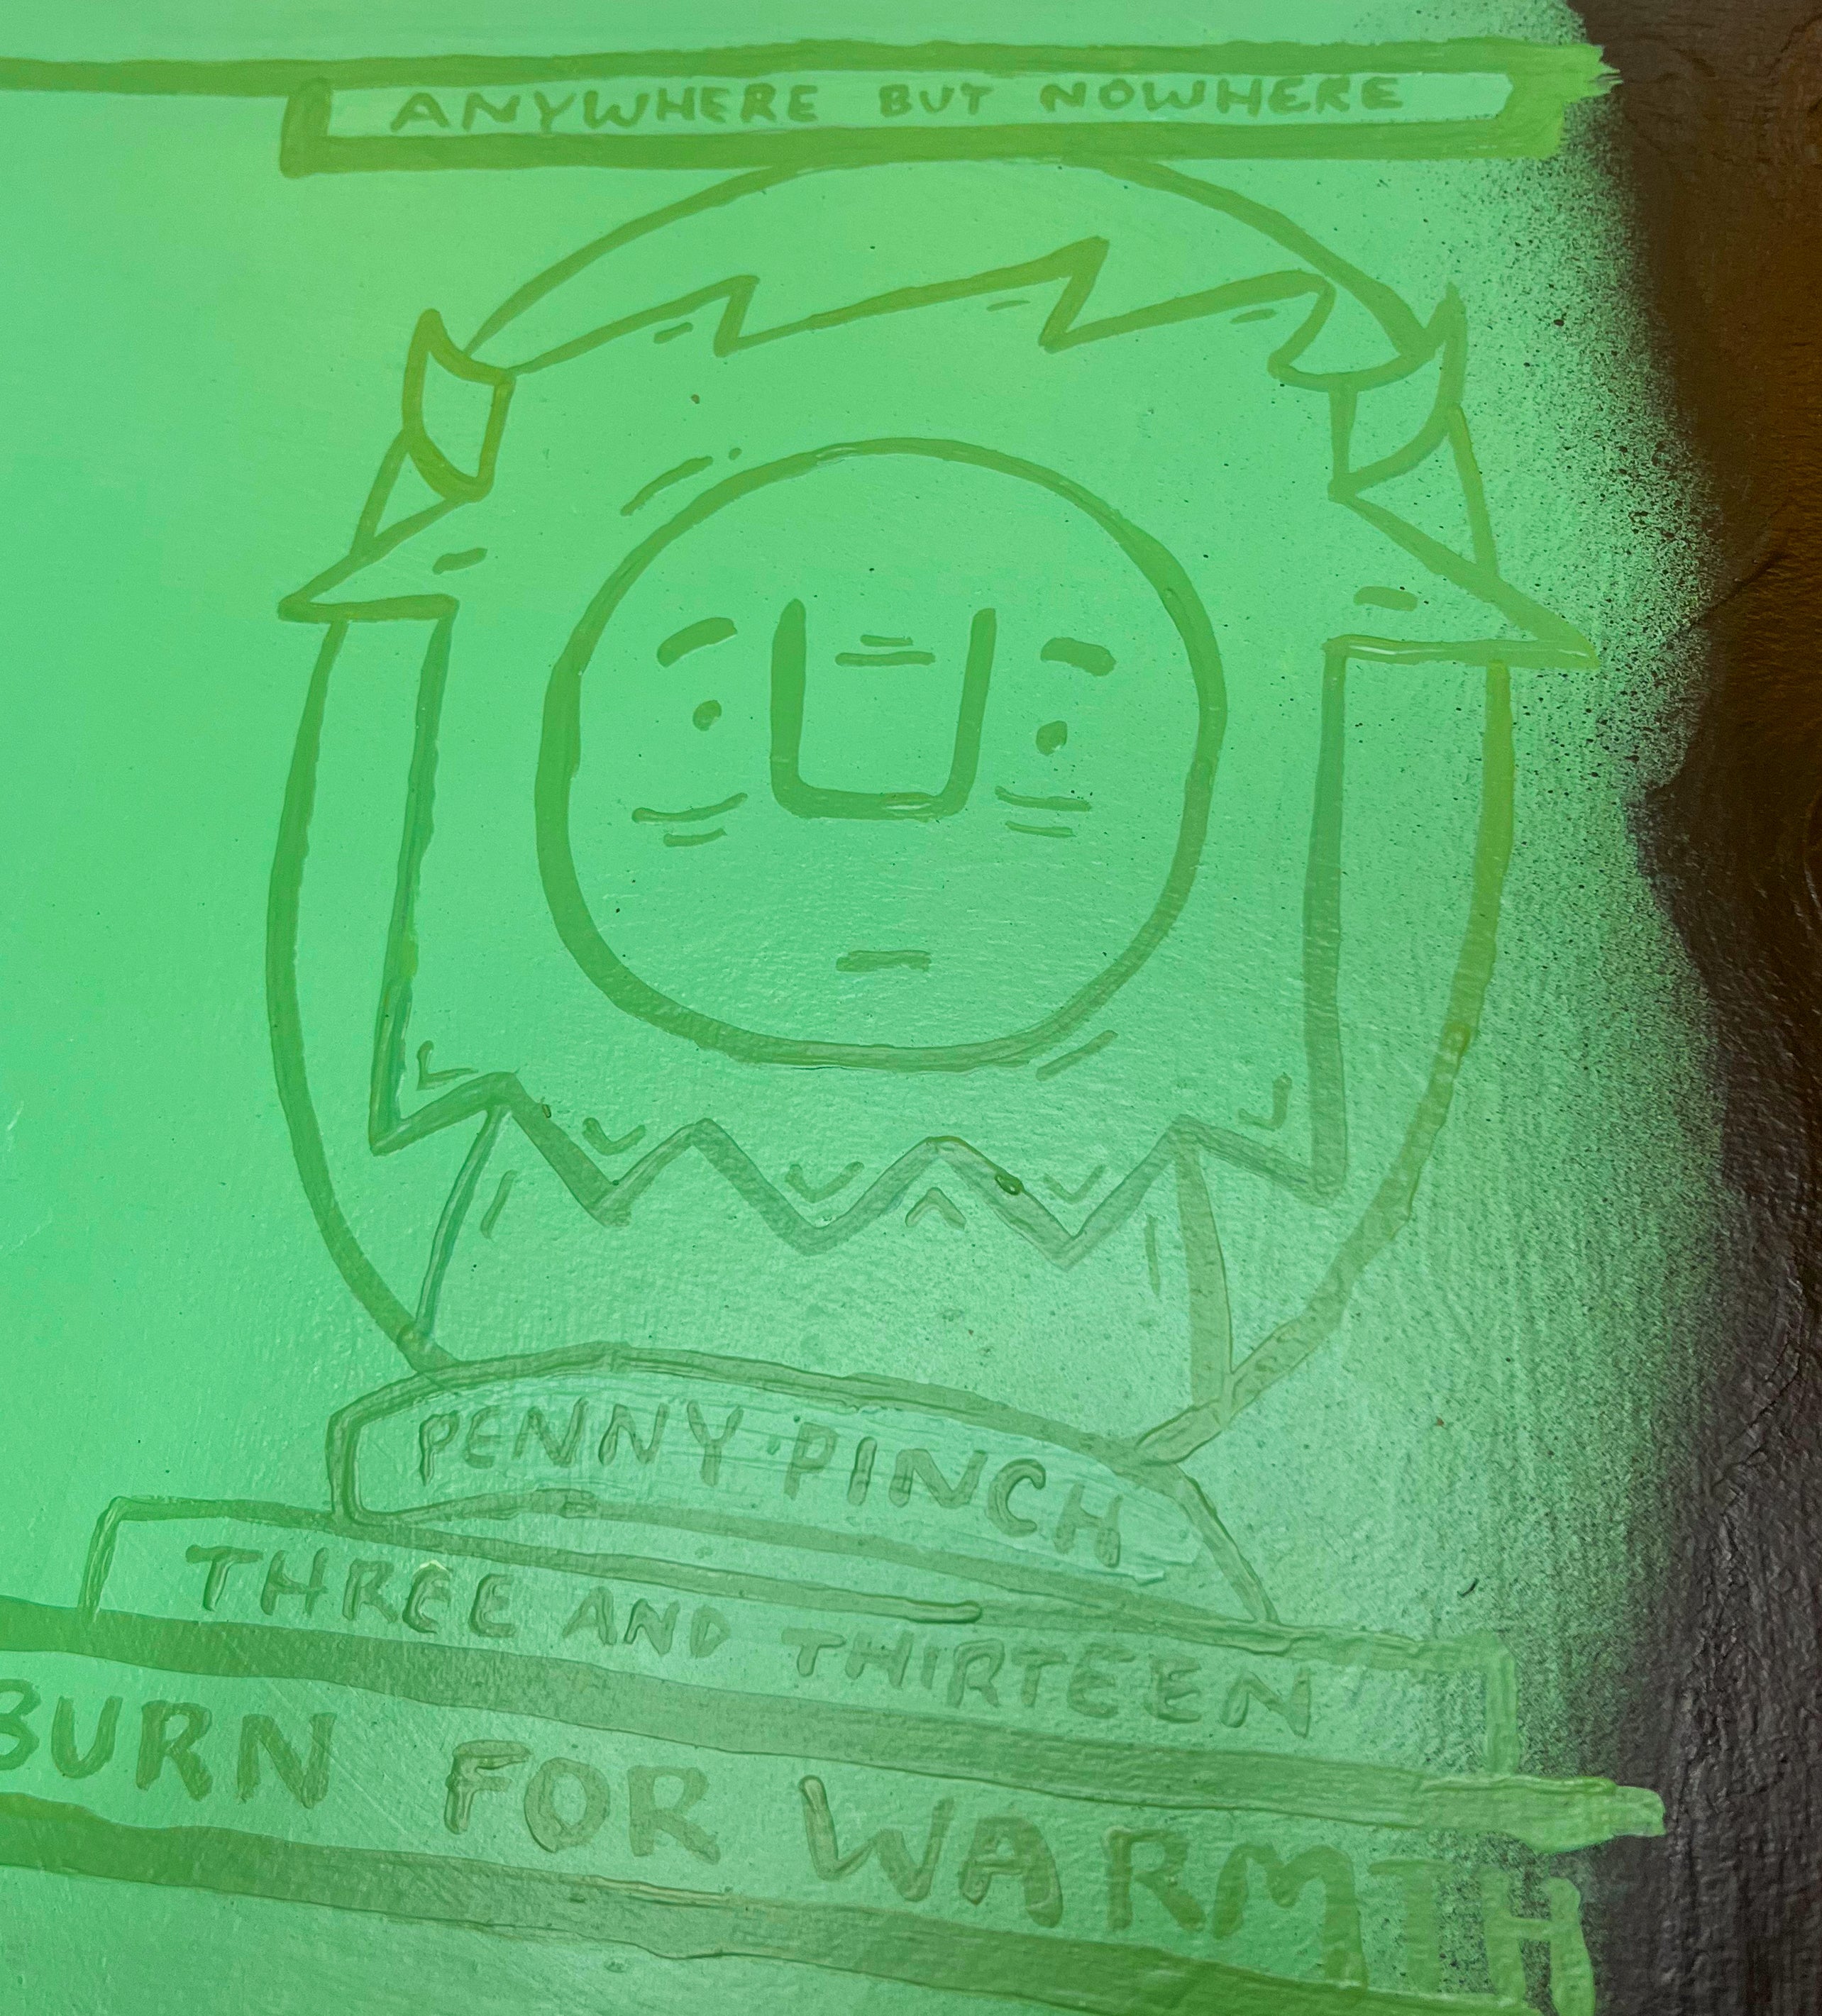 “Burn for Warmth” by Penny Pinch